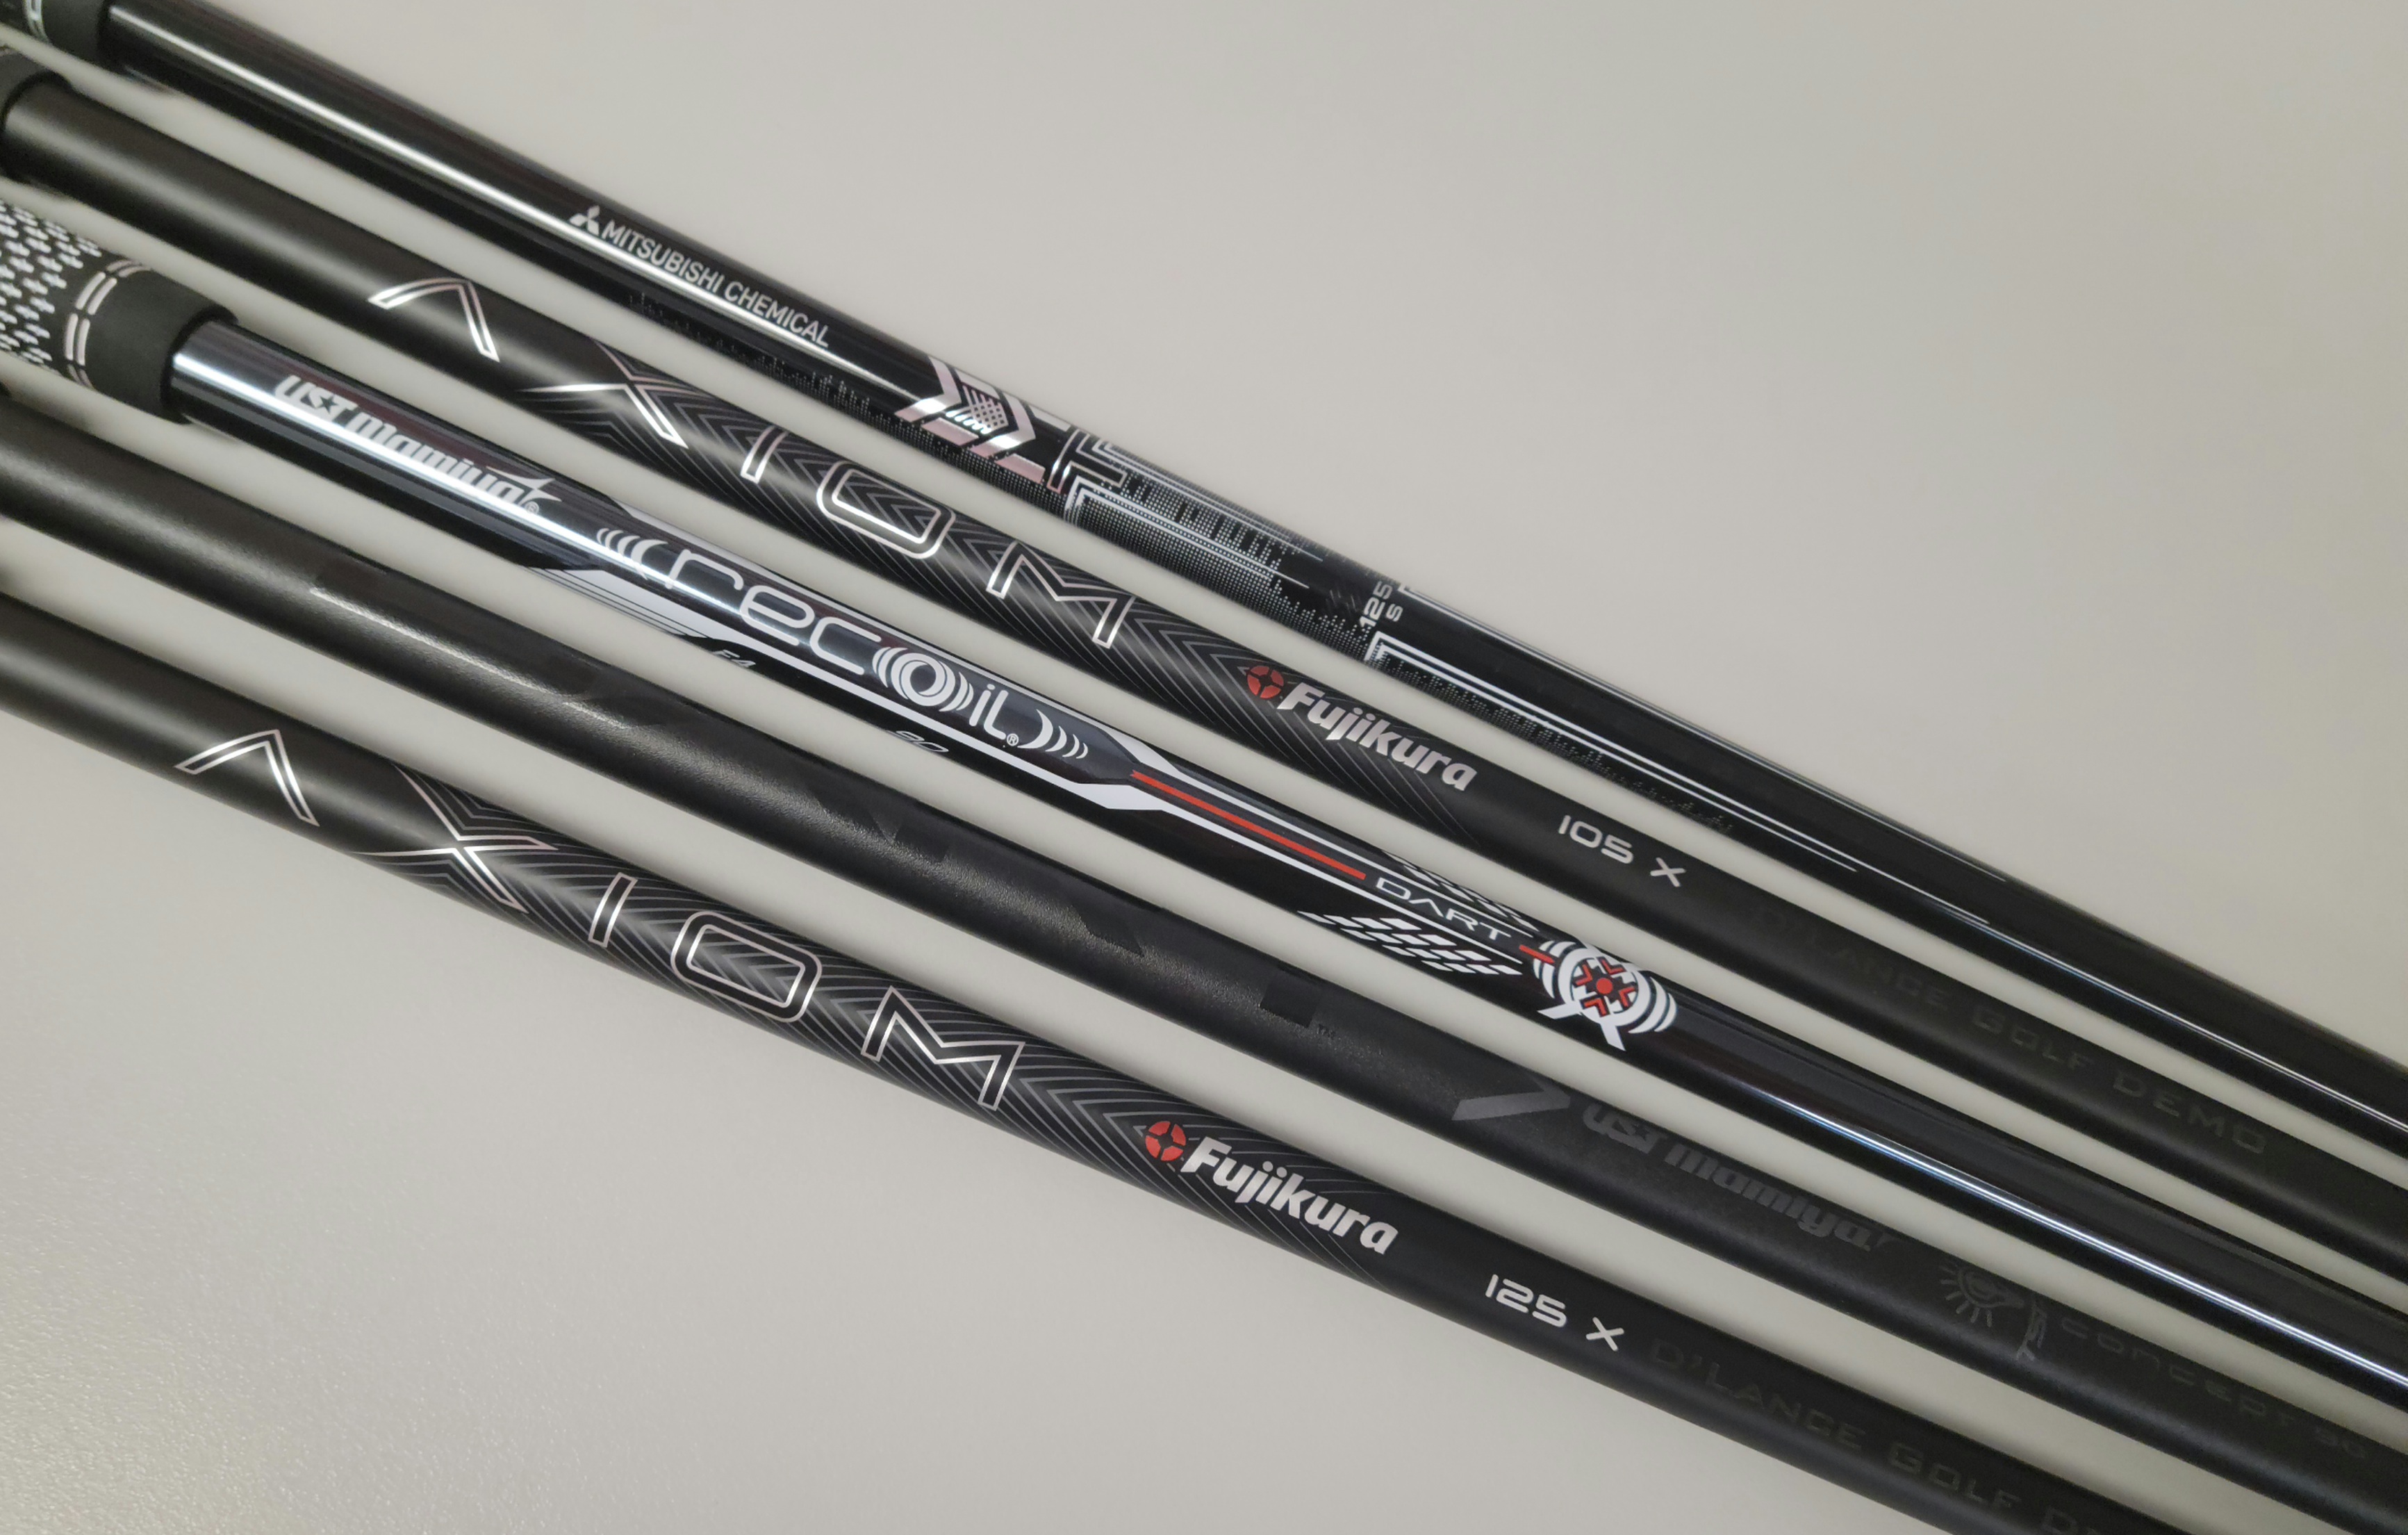 Heavy Graphite Iron Shafts Make it Easier to Switch From Steel